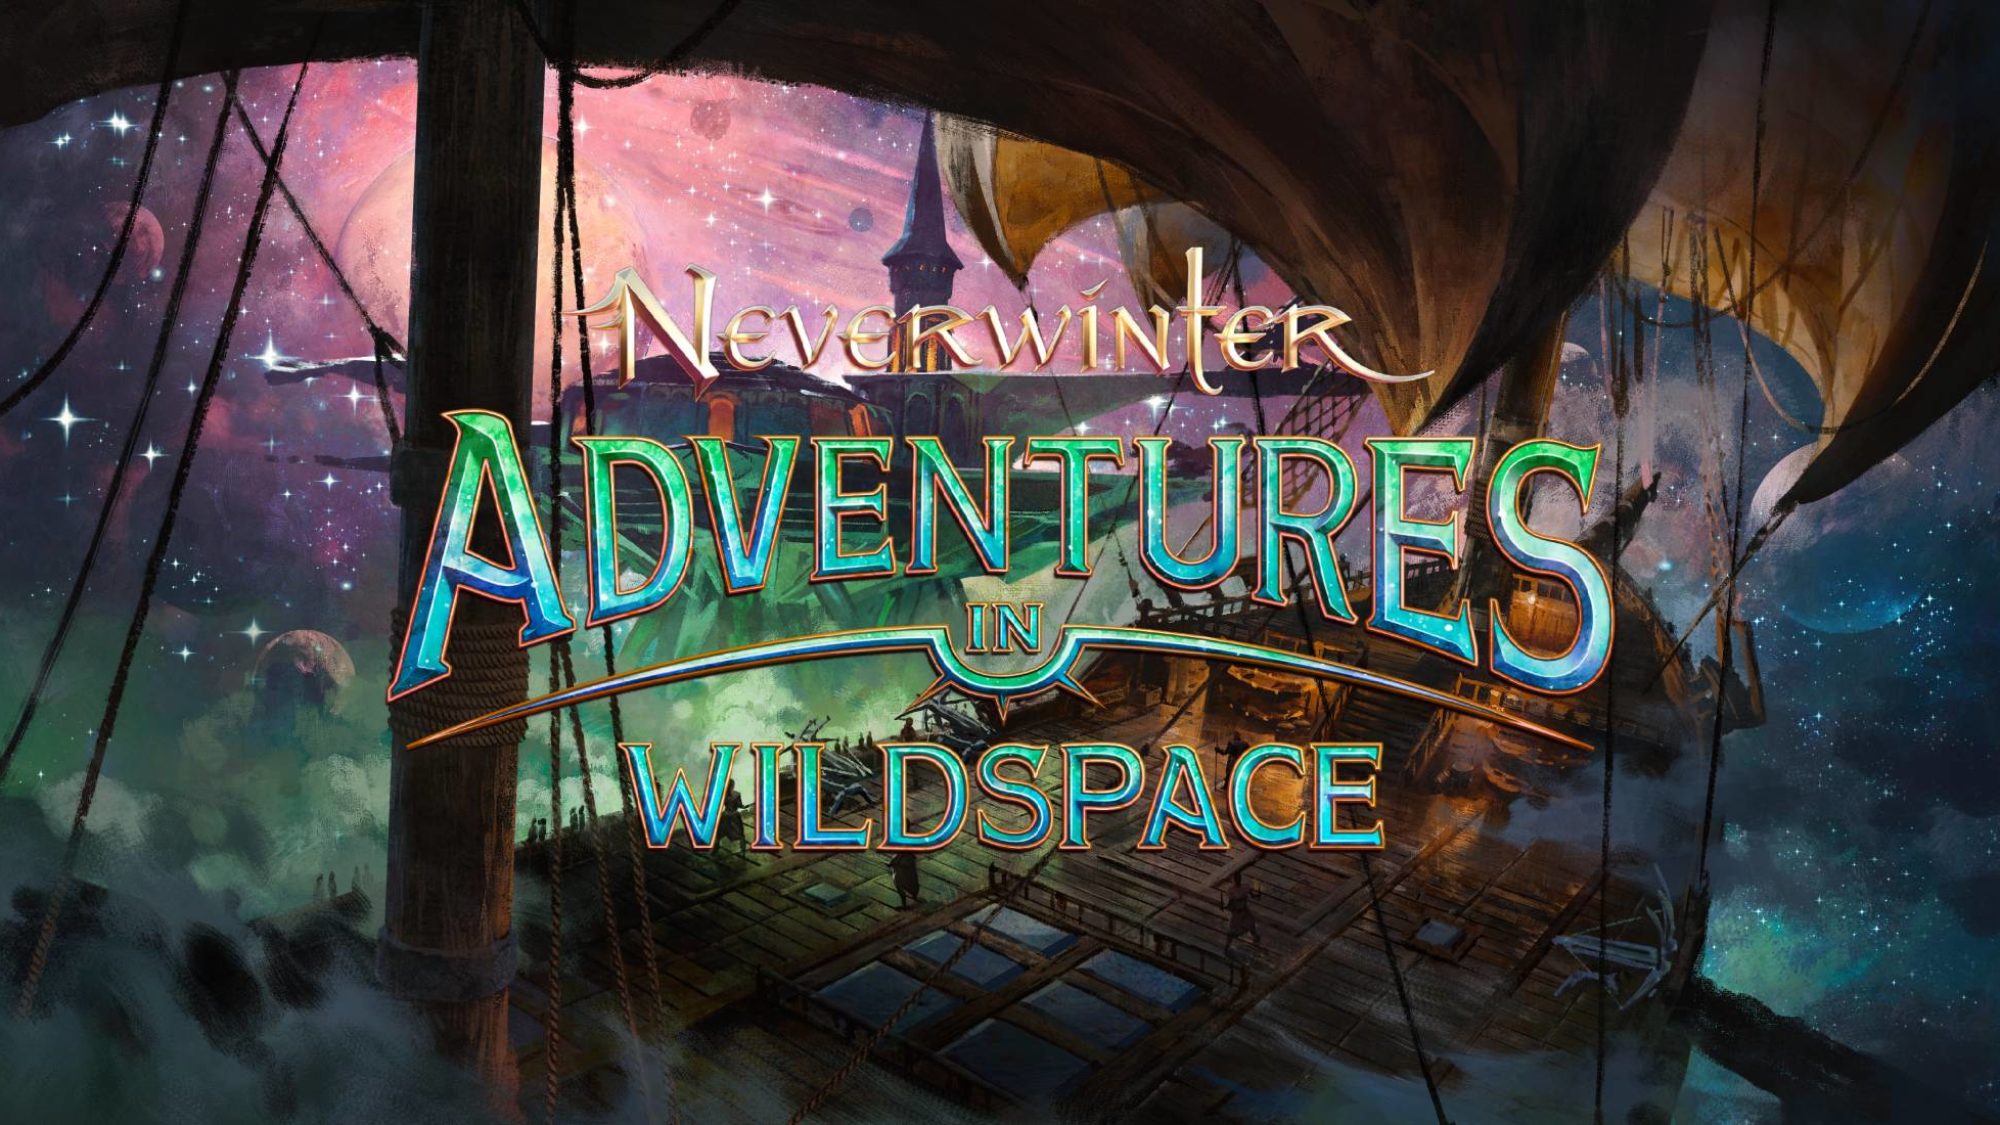 Neverwinter’s Latest Expansion “Adventures in Wildspace” Introduces “The Imperial Citadel” and New Heroic Encounters